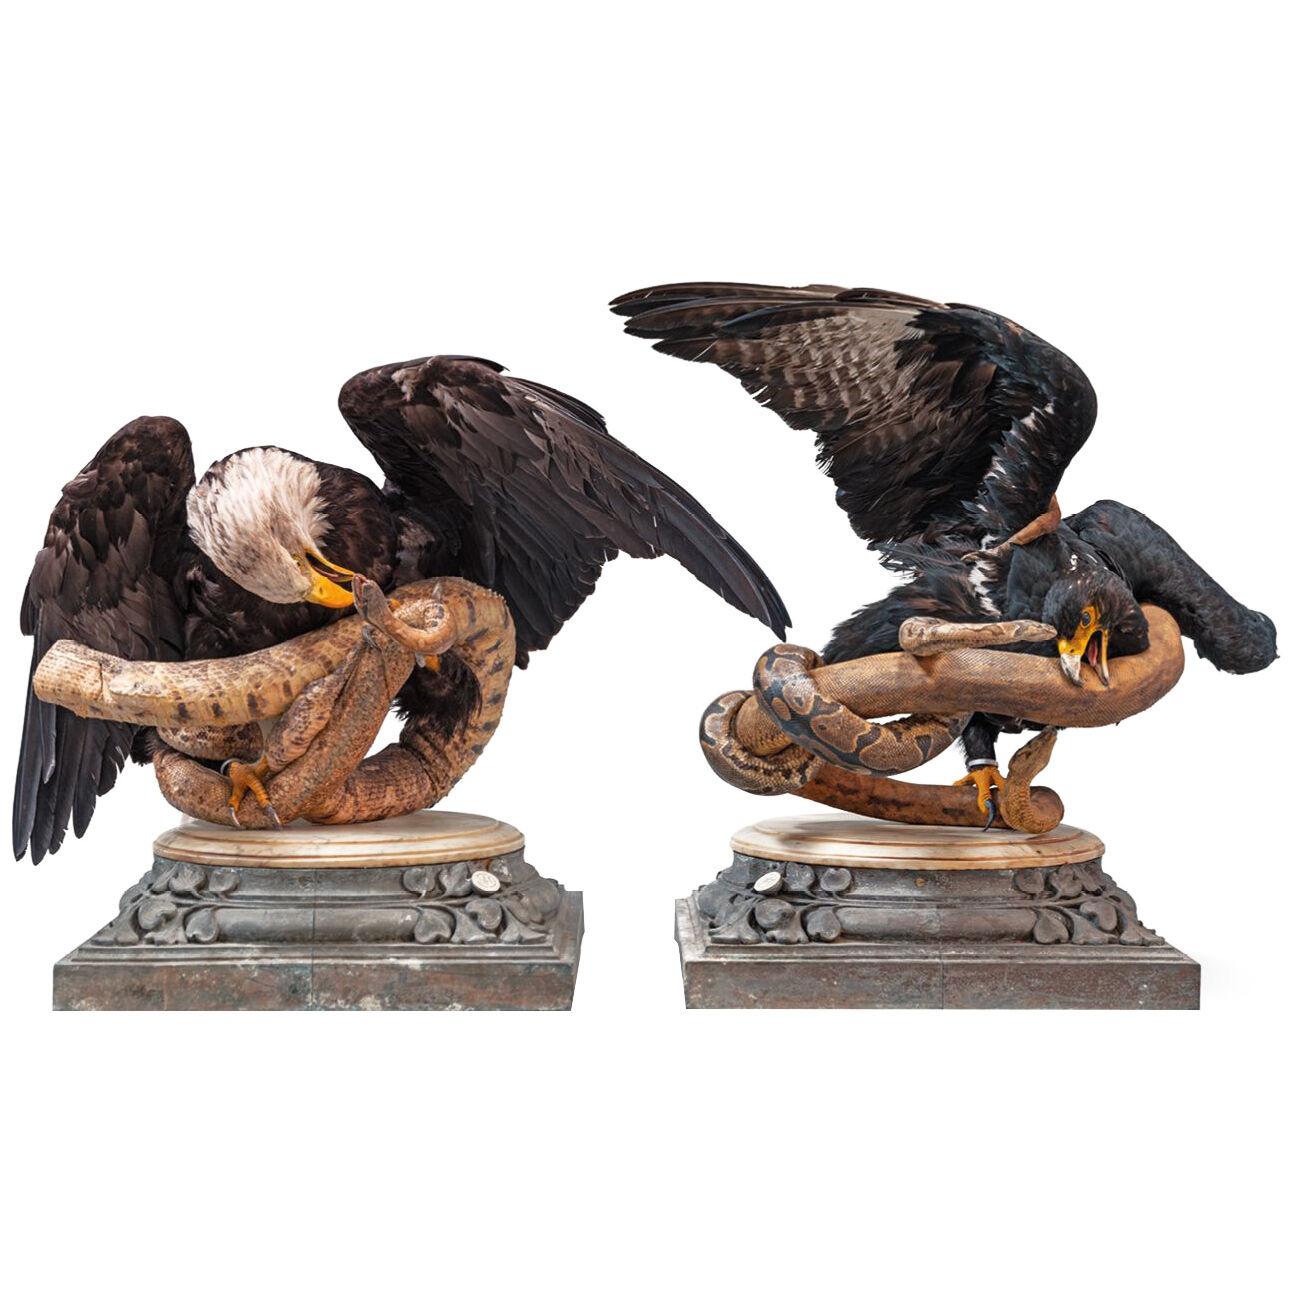 Fine Taxidermy Eagles and Snakes Duo by Sinke & van Tongeren